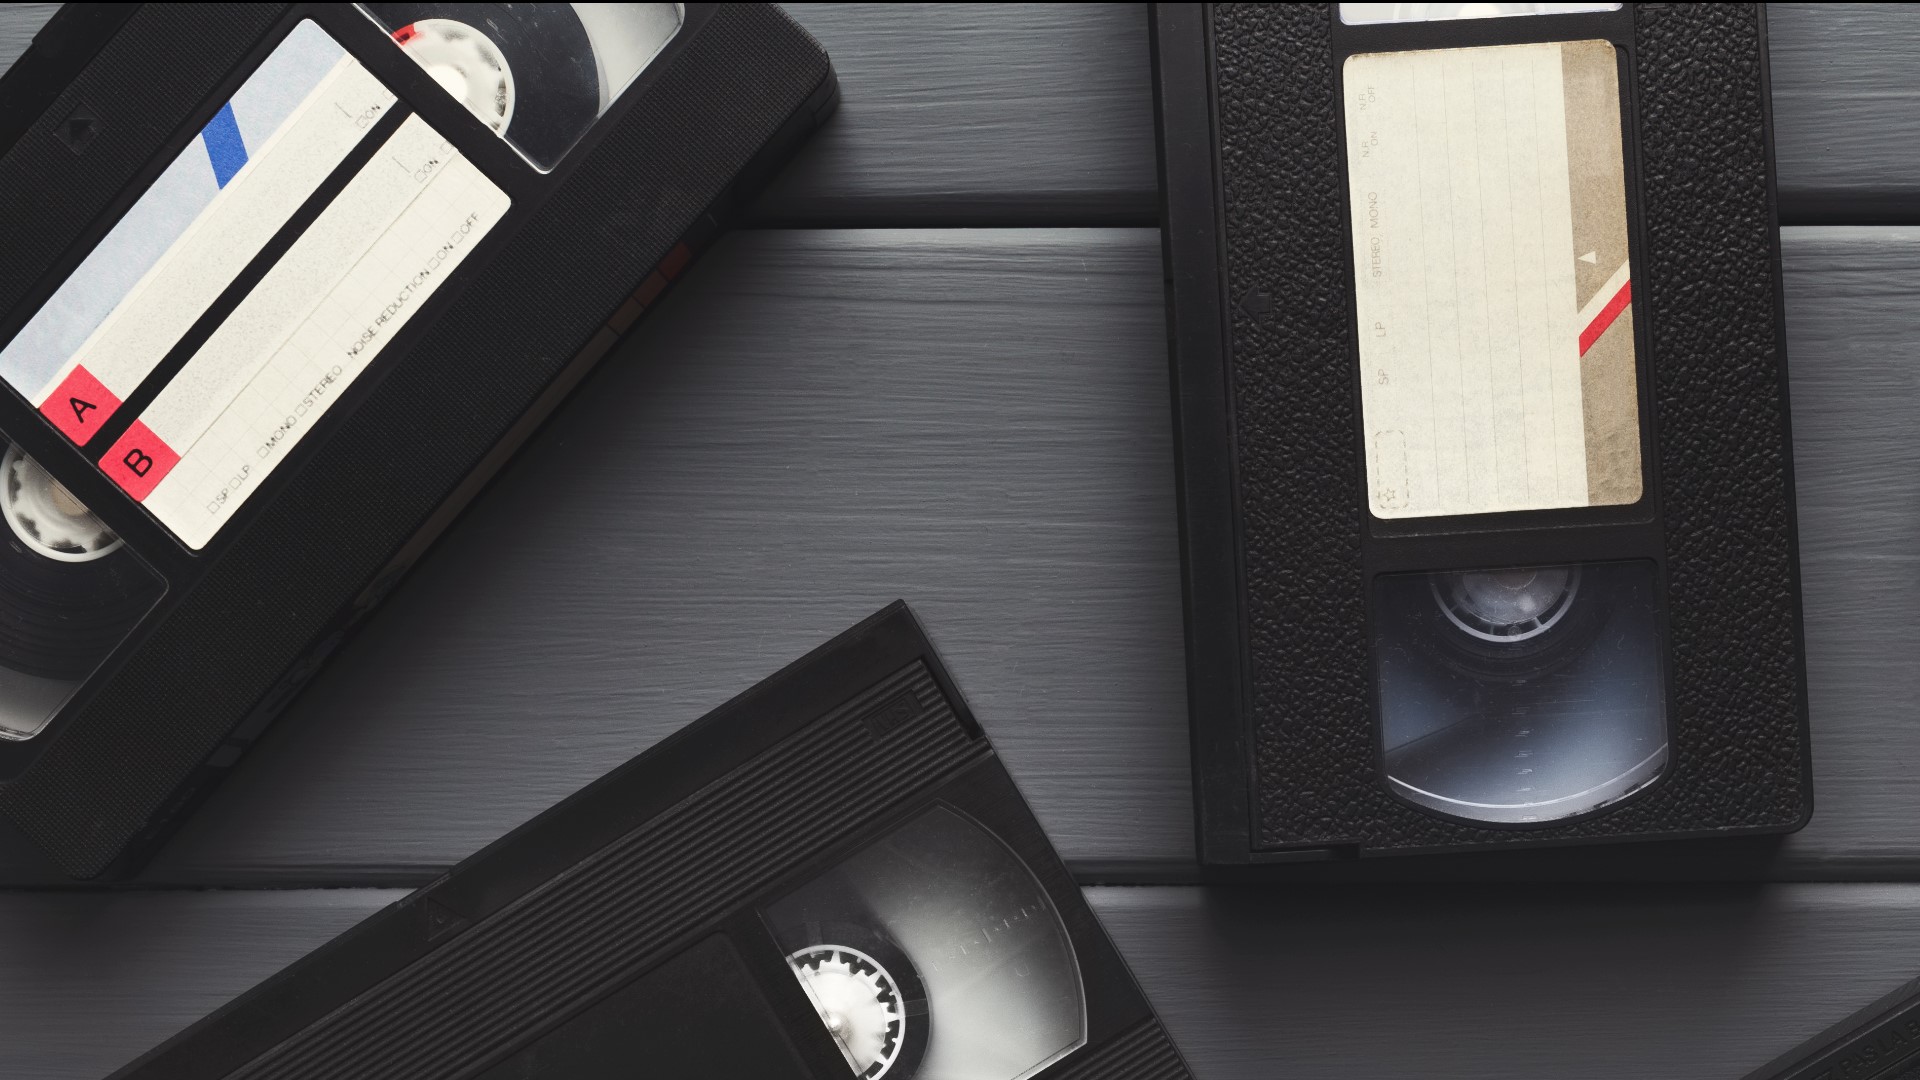 Your Classic Disney Vhs Tapes Could Be Worth Thousands Of Dollars